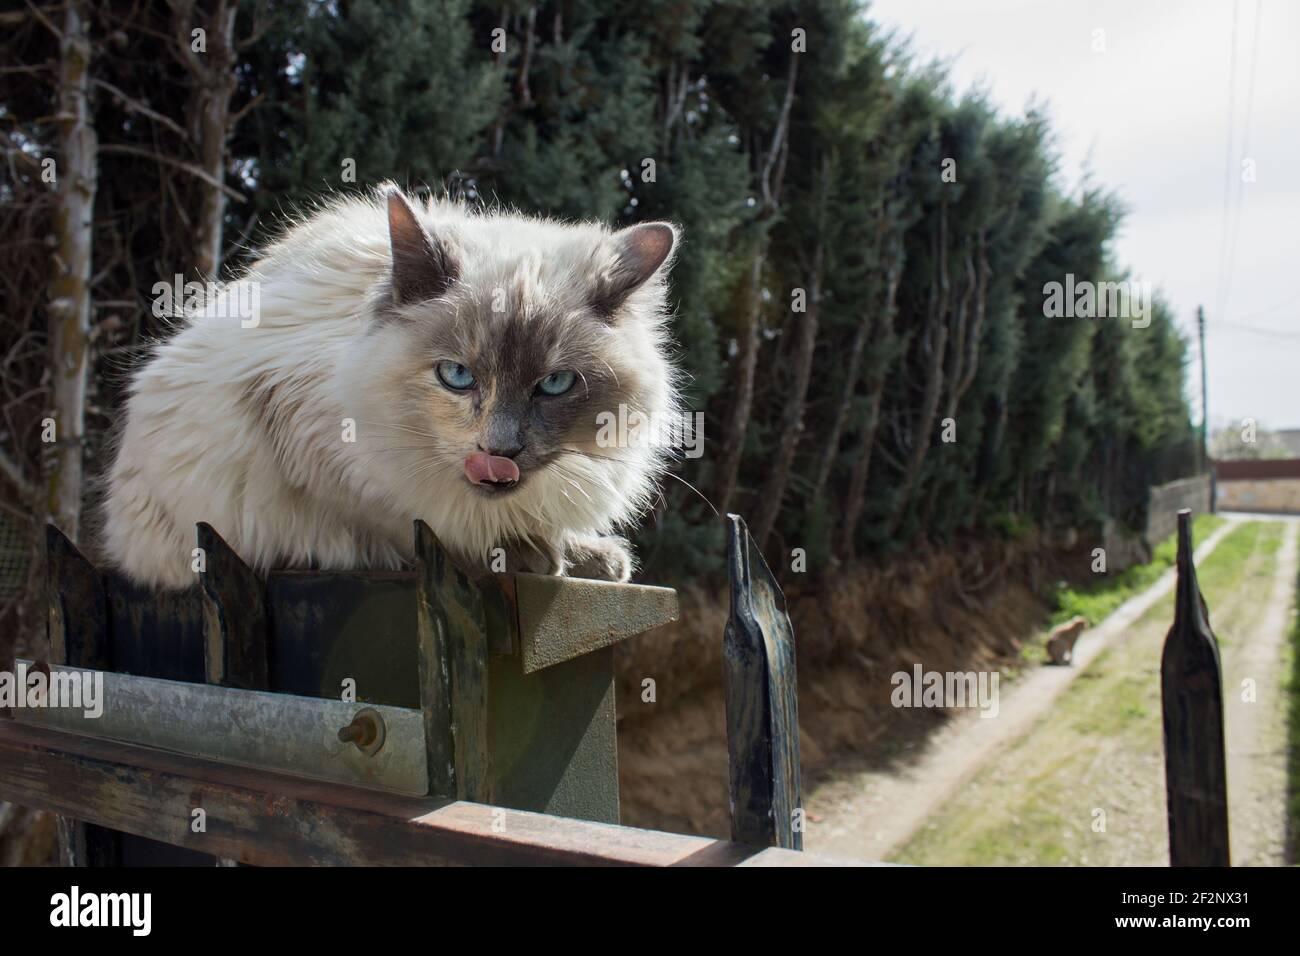 A defiantly looking cat licks his face with his tongue over a mailbox perched on top of a rusty exterior iron gate in front of a dirt road. Stock Photo